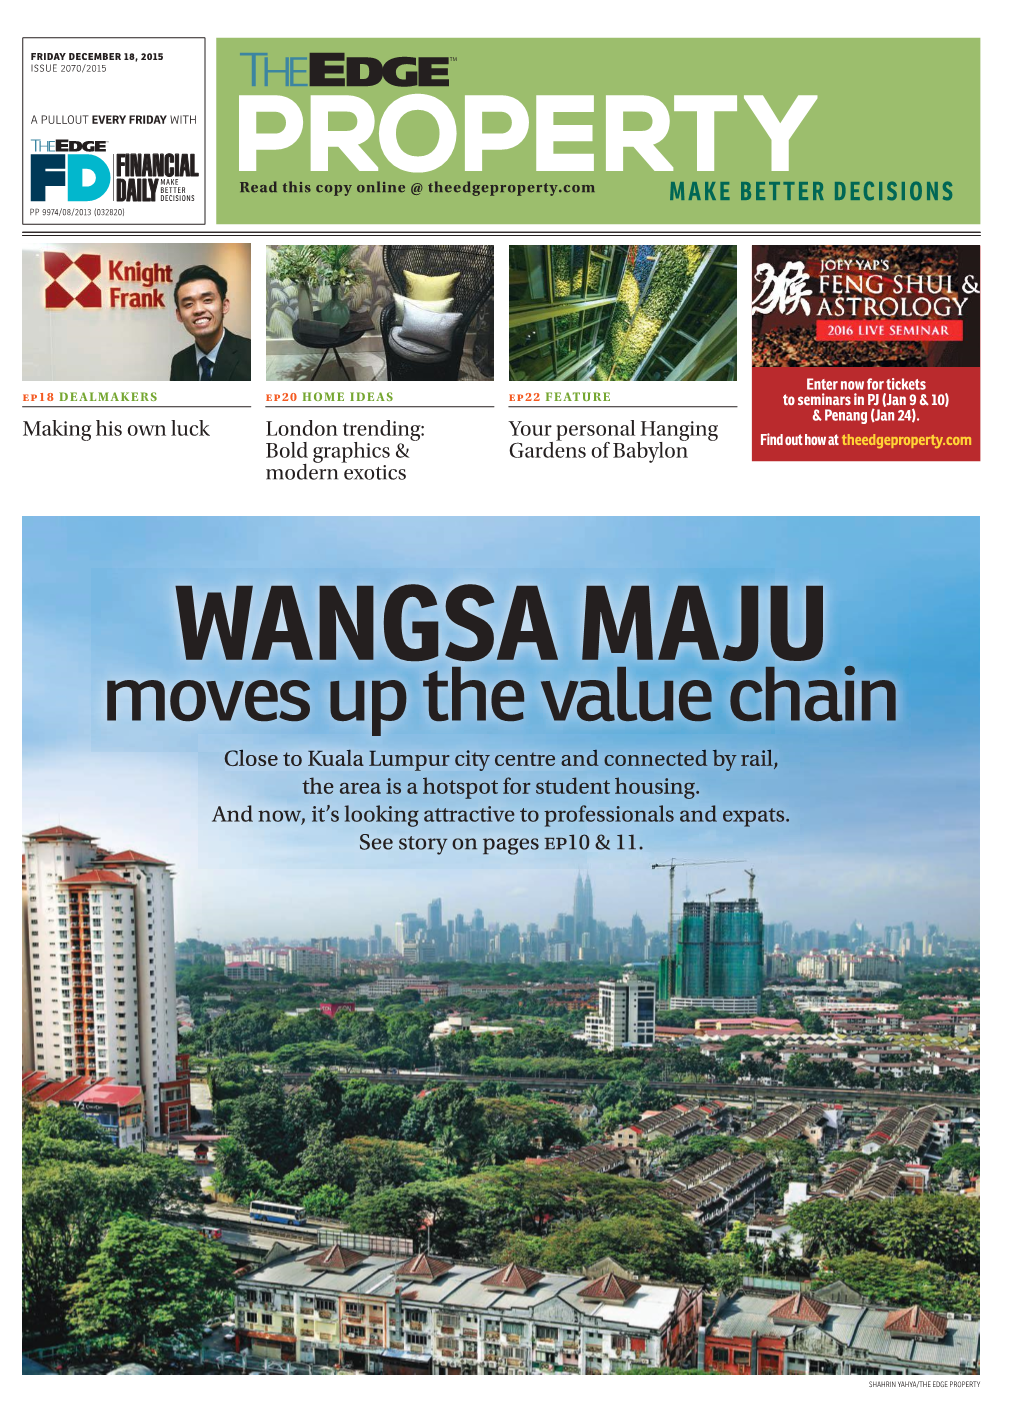 WANGSA MAJU Moves up the Value Chain Closecl to Kualak L Lumpurl Cityi Centre Andd Connectedd Bby Rail,Il the Area Is a Hotspot for Student Housing